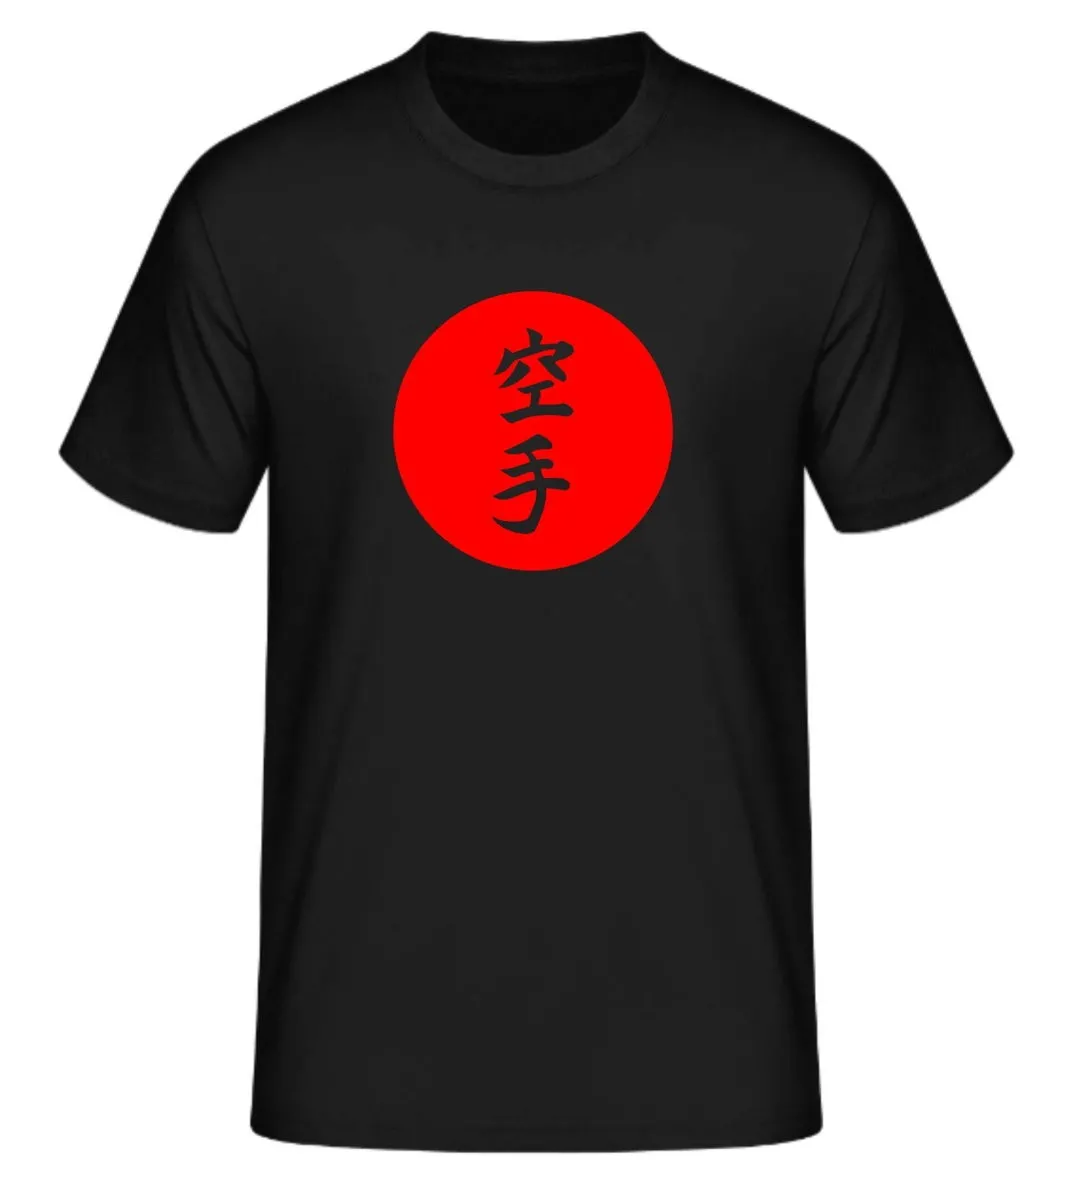 T-shirt black karate sun with Japanese characters